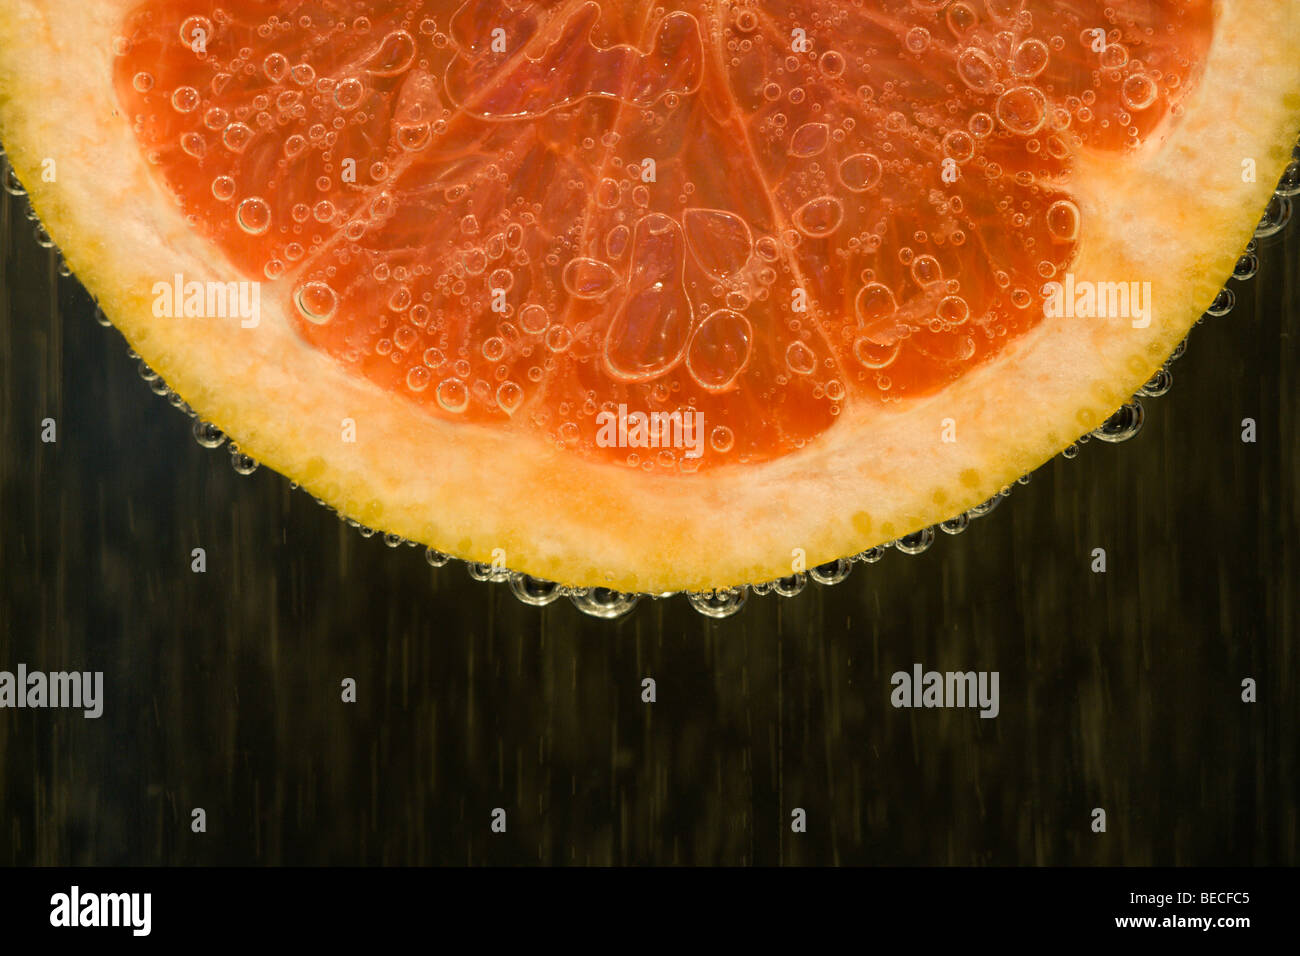 Close-up image of a section of a red / ruby grapefruit slice surrounded by bubbles of water Stock Photo